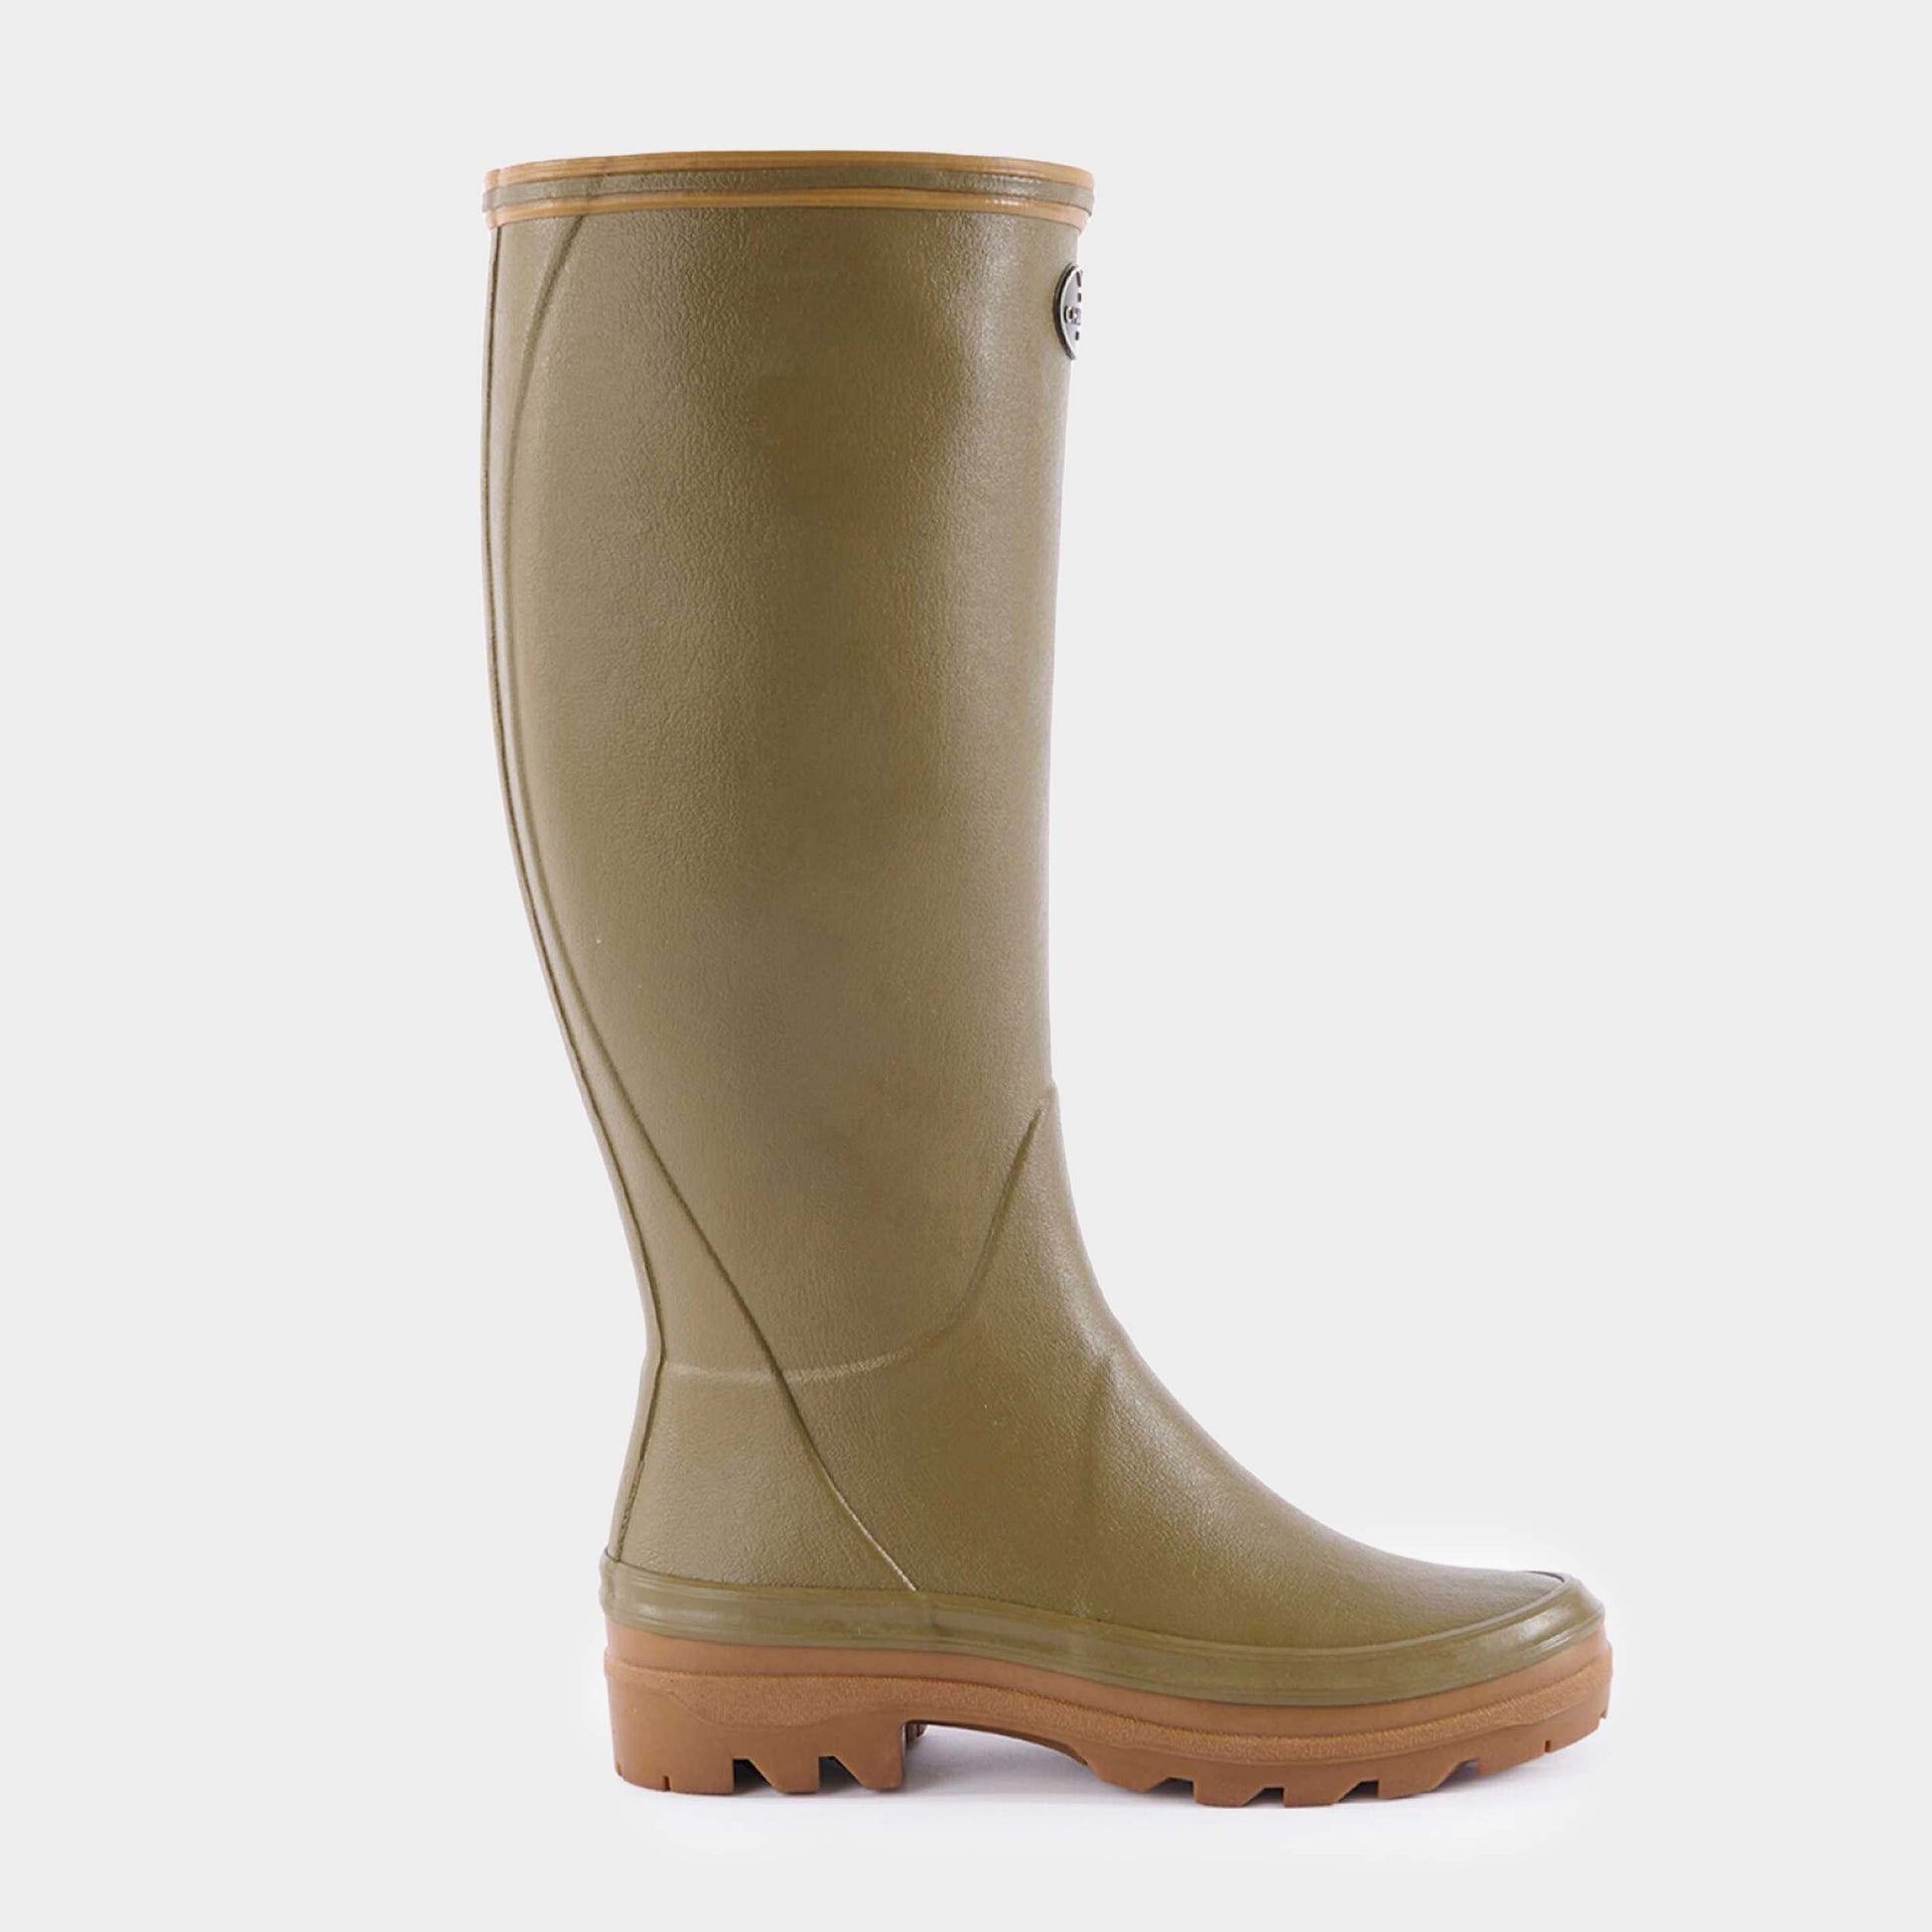 Le Chameau WOMEN'S Giverny Jersey Lined Boot in Vert Vierzon